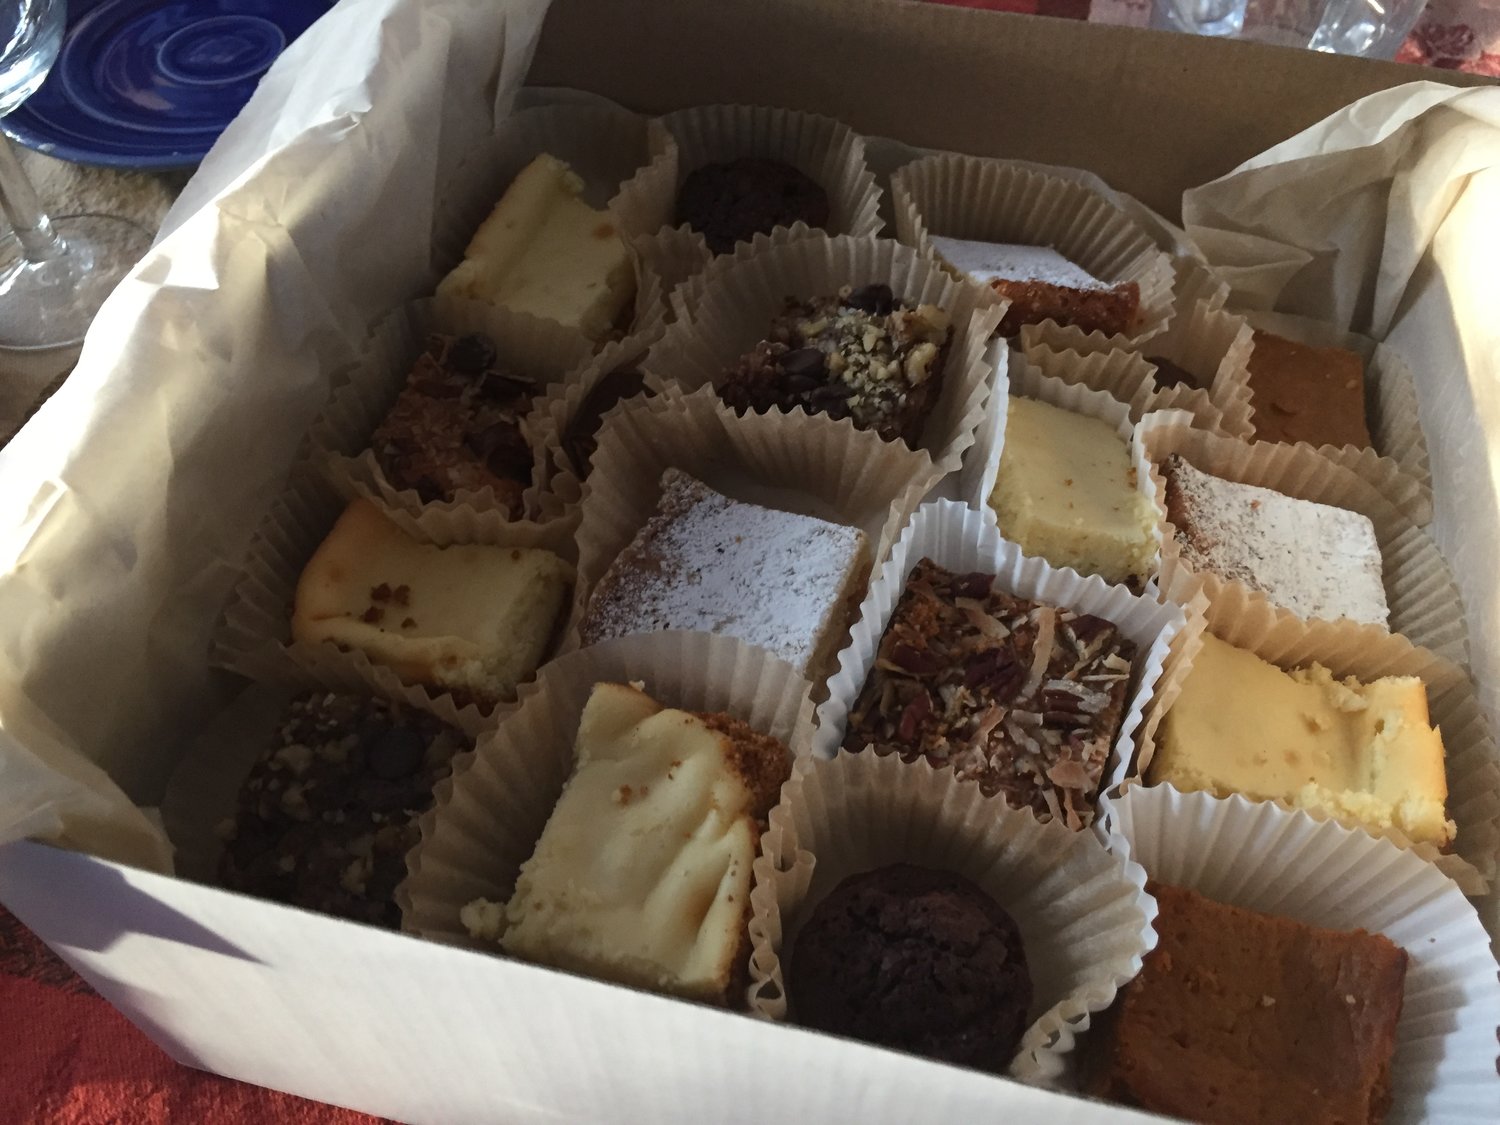 A box of homemade goodies is a lovely way of letting neighbors and co-workers know that you appreciate them.  My go-tos are bars or moist cake that I can make in large quantities, without having to fuss much.